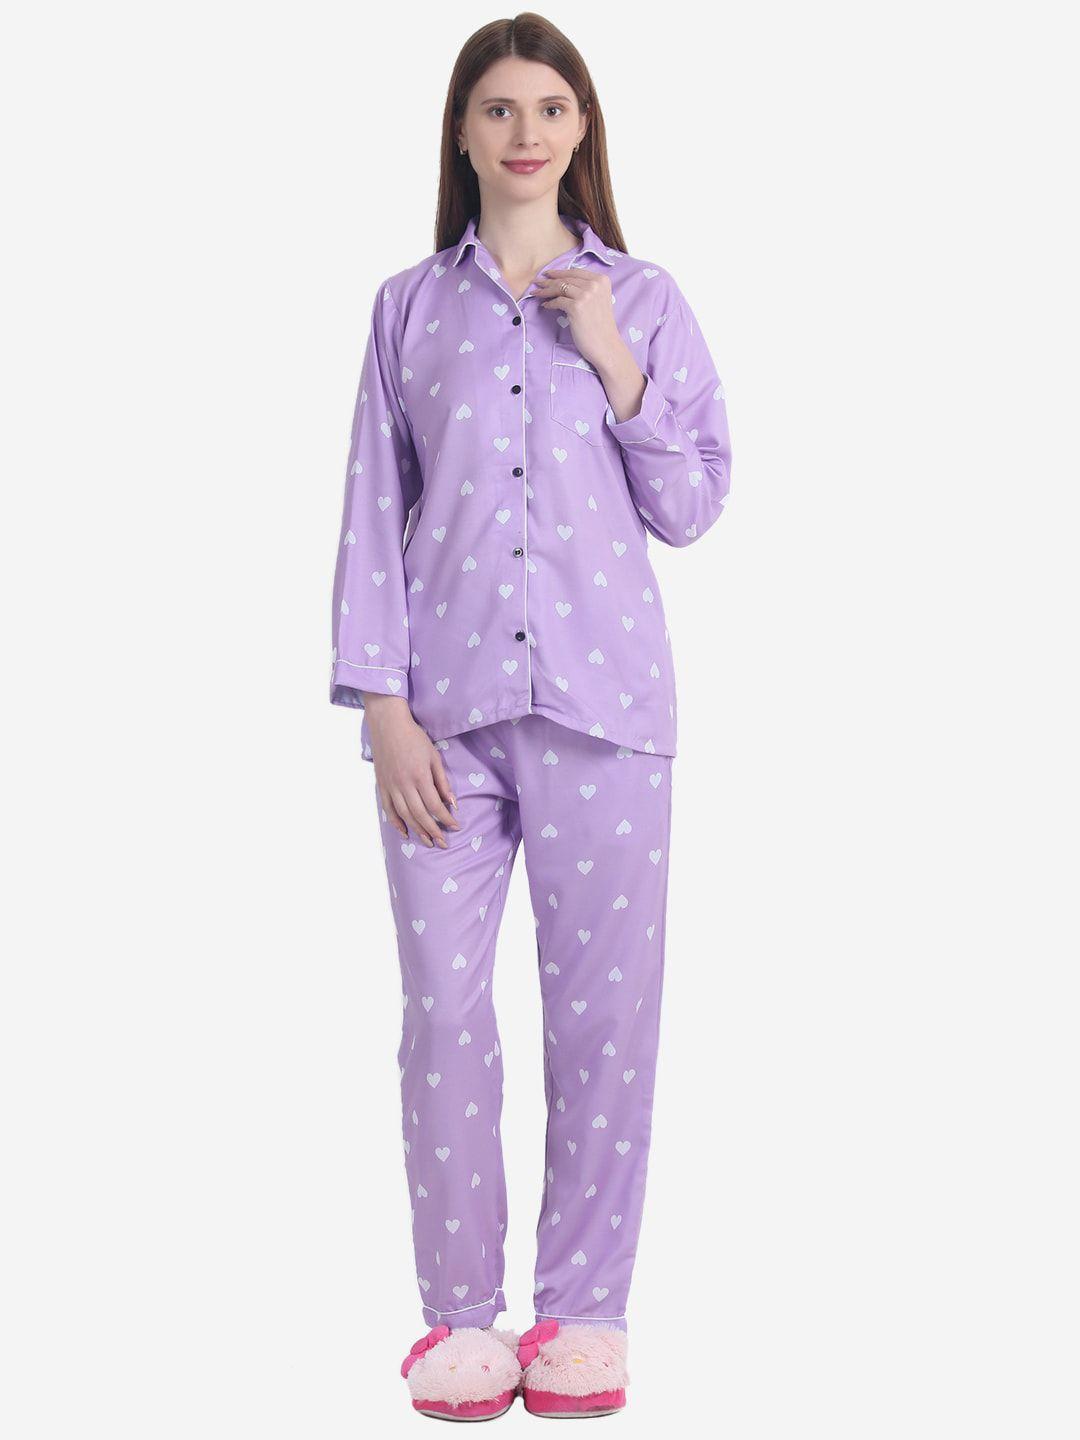 house of jammies women lavender & white printed night suit